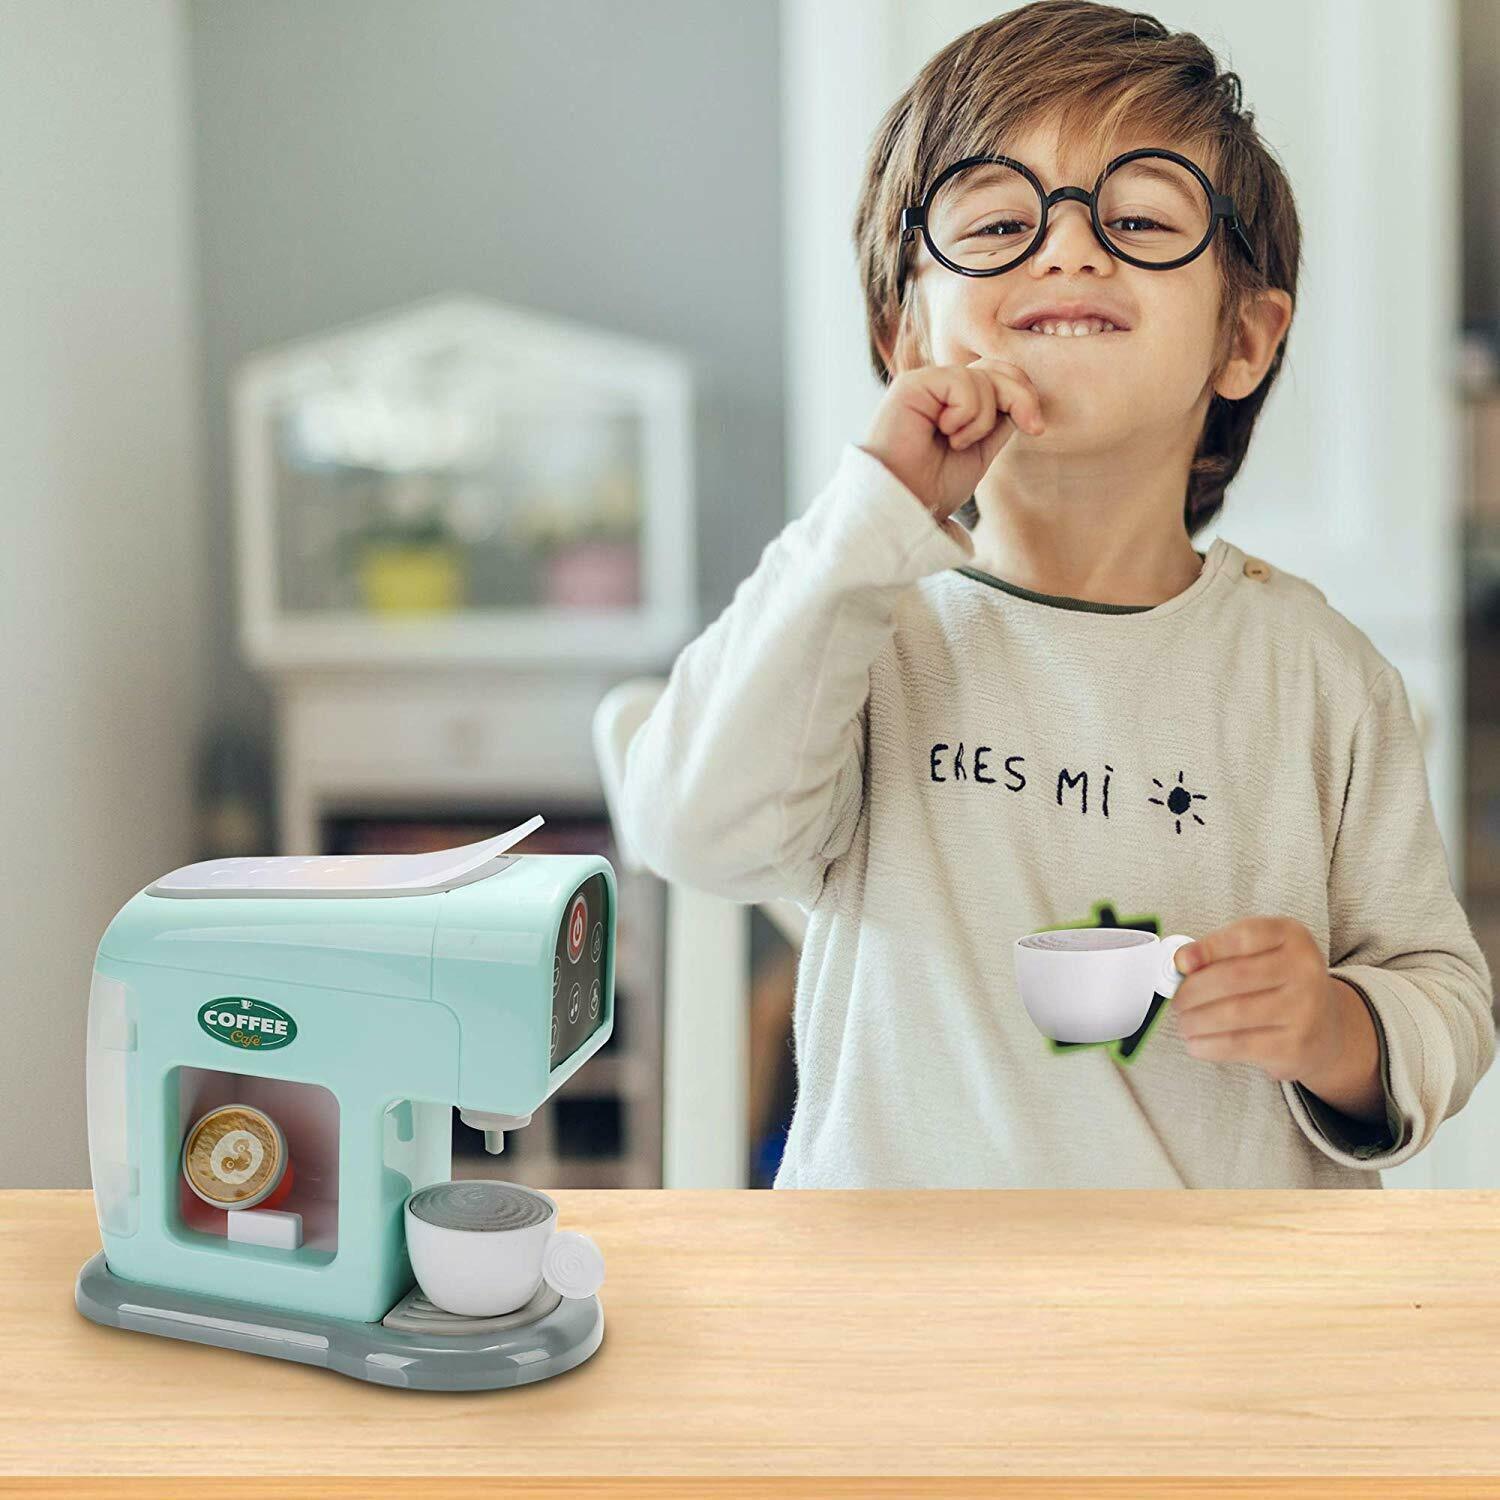 Infunbebe Light And Sound Coffee Machine Kitchen Play Toy - With Pretend Coffee Capsules